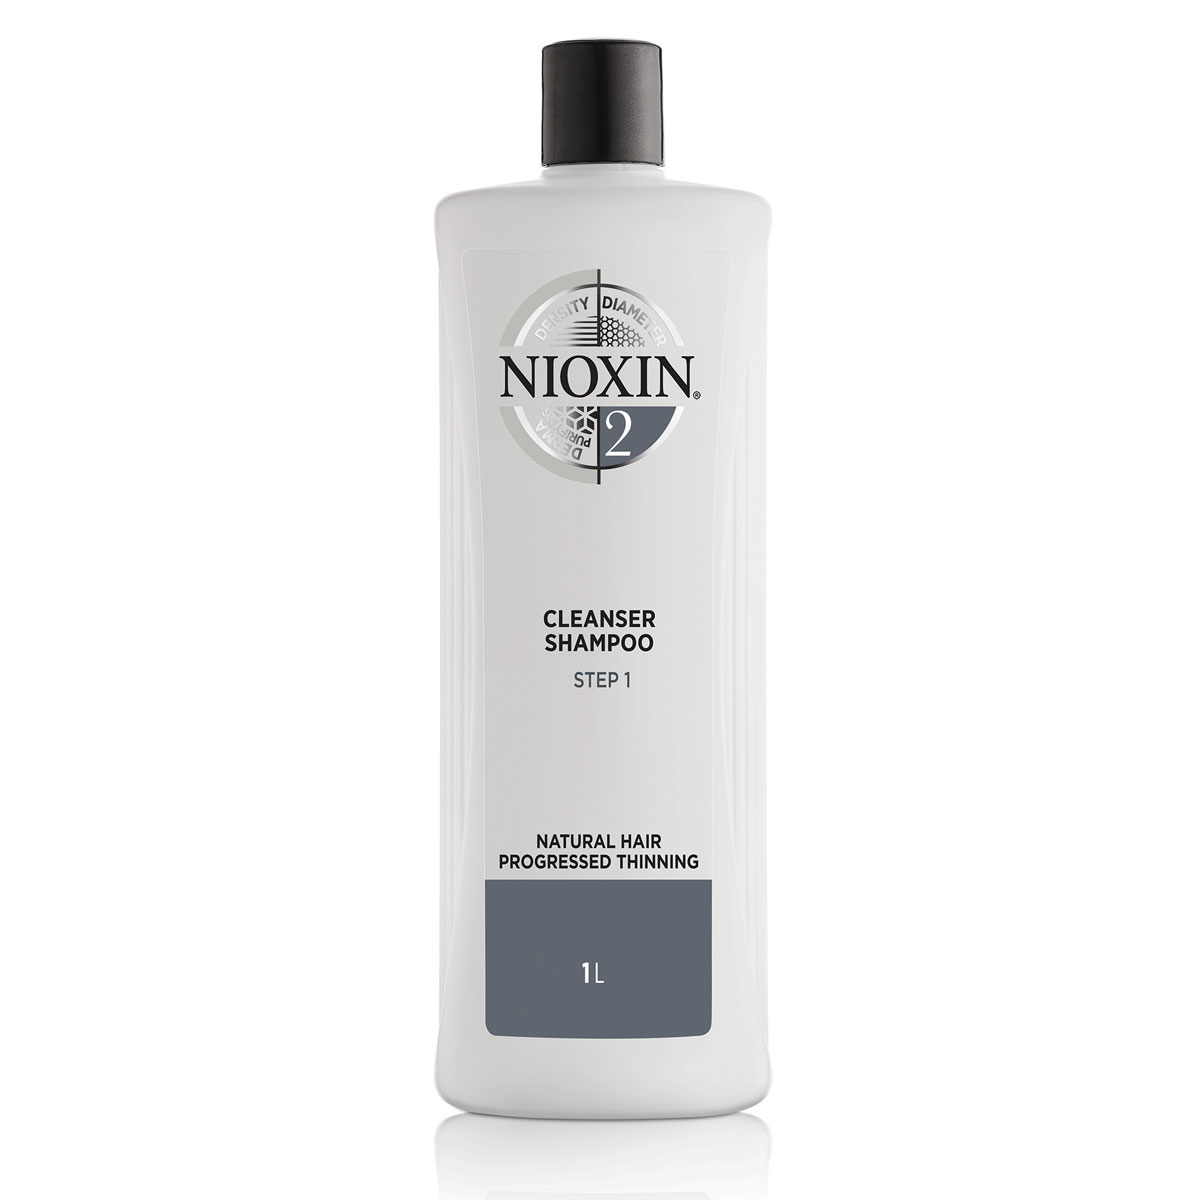 Nioxin 3-Part System 2 Cleanser Shampoo For Natural Hair With Progressed Thinning 1000Ml